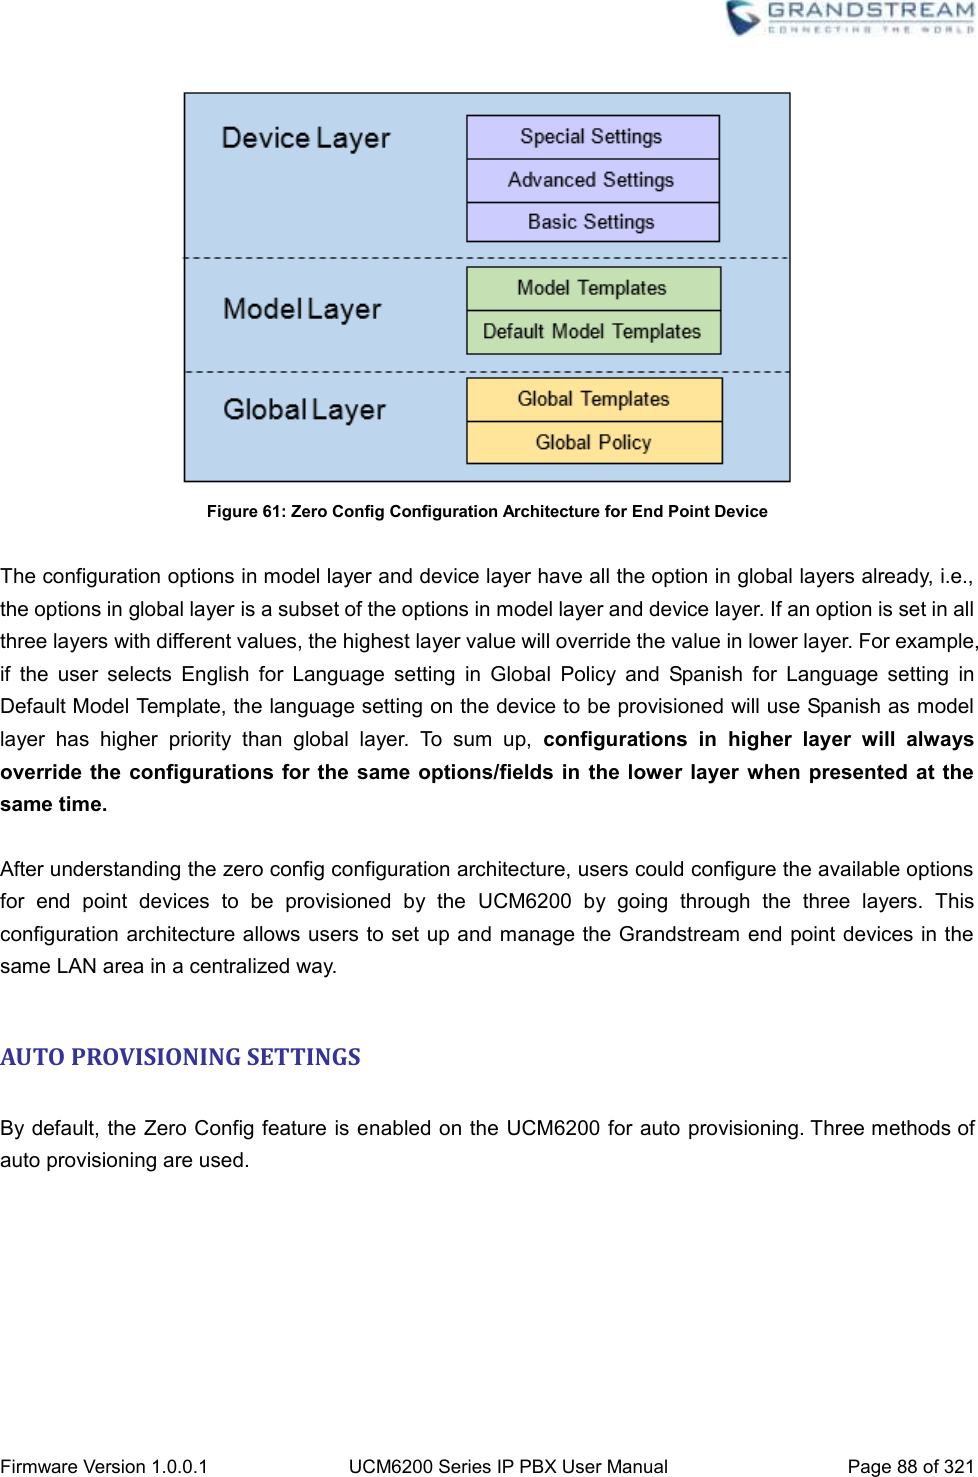  Firmware Version 1.0.0.1 UCM6200 Series IP PBX User Manual Page 88 of 321     Figure 61: Zero Config Configuration Architecture for End Point Device  The configuration options in model layer and device layer have all the option in global layers already, i.e., the options in global layer is a subset of the options in model layer and device layer. If an option is set in all three layers with different values, the highest layer value will override the value in lower layer. For example, if  the  user  selects  English  for  Language  setting  in  Global  Policy  and  Spanish  for  Language  setting  in Default Model Template, the language setting on the device to be provisioned will use Spanish as model layer  has  higher  priority  than  global  layer.  To  sum  up,  configurations  in  higher  layer  will  always override the configurations for  the same  options/fields in  the lower  layer  when presented  at the same time.  After understanding the zero config configuration architecture, users could configure the available options for  end  point  devices  to  be  provisioned  by  the  UCM6200  by  going  through  the  three  layers.  This configuration architecture allows users to set up and manage the Grandstream end point devices in the same LAN area in a centralized way.  AUTO PROVISIONING SETTINGS  By default, the Zero Config feature is enabled on the UCM6200 for auto provisioning. Three methods of auto provisioning are used. 